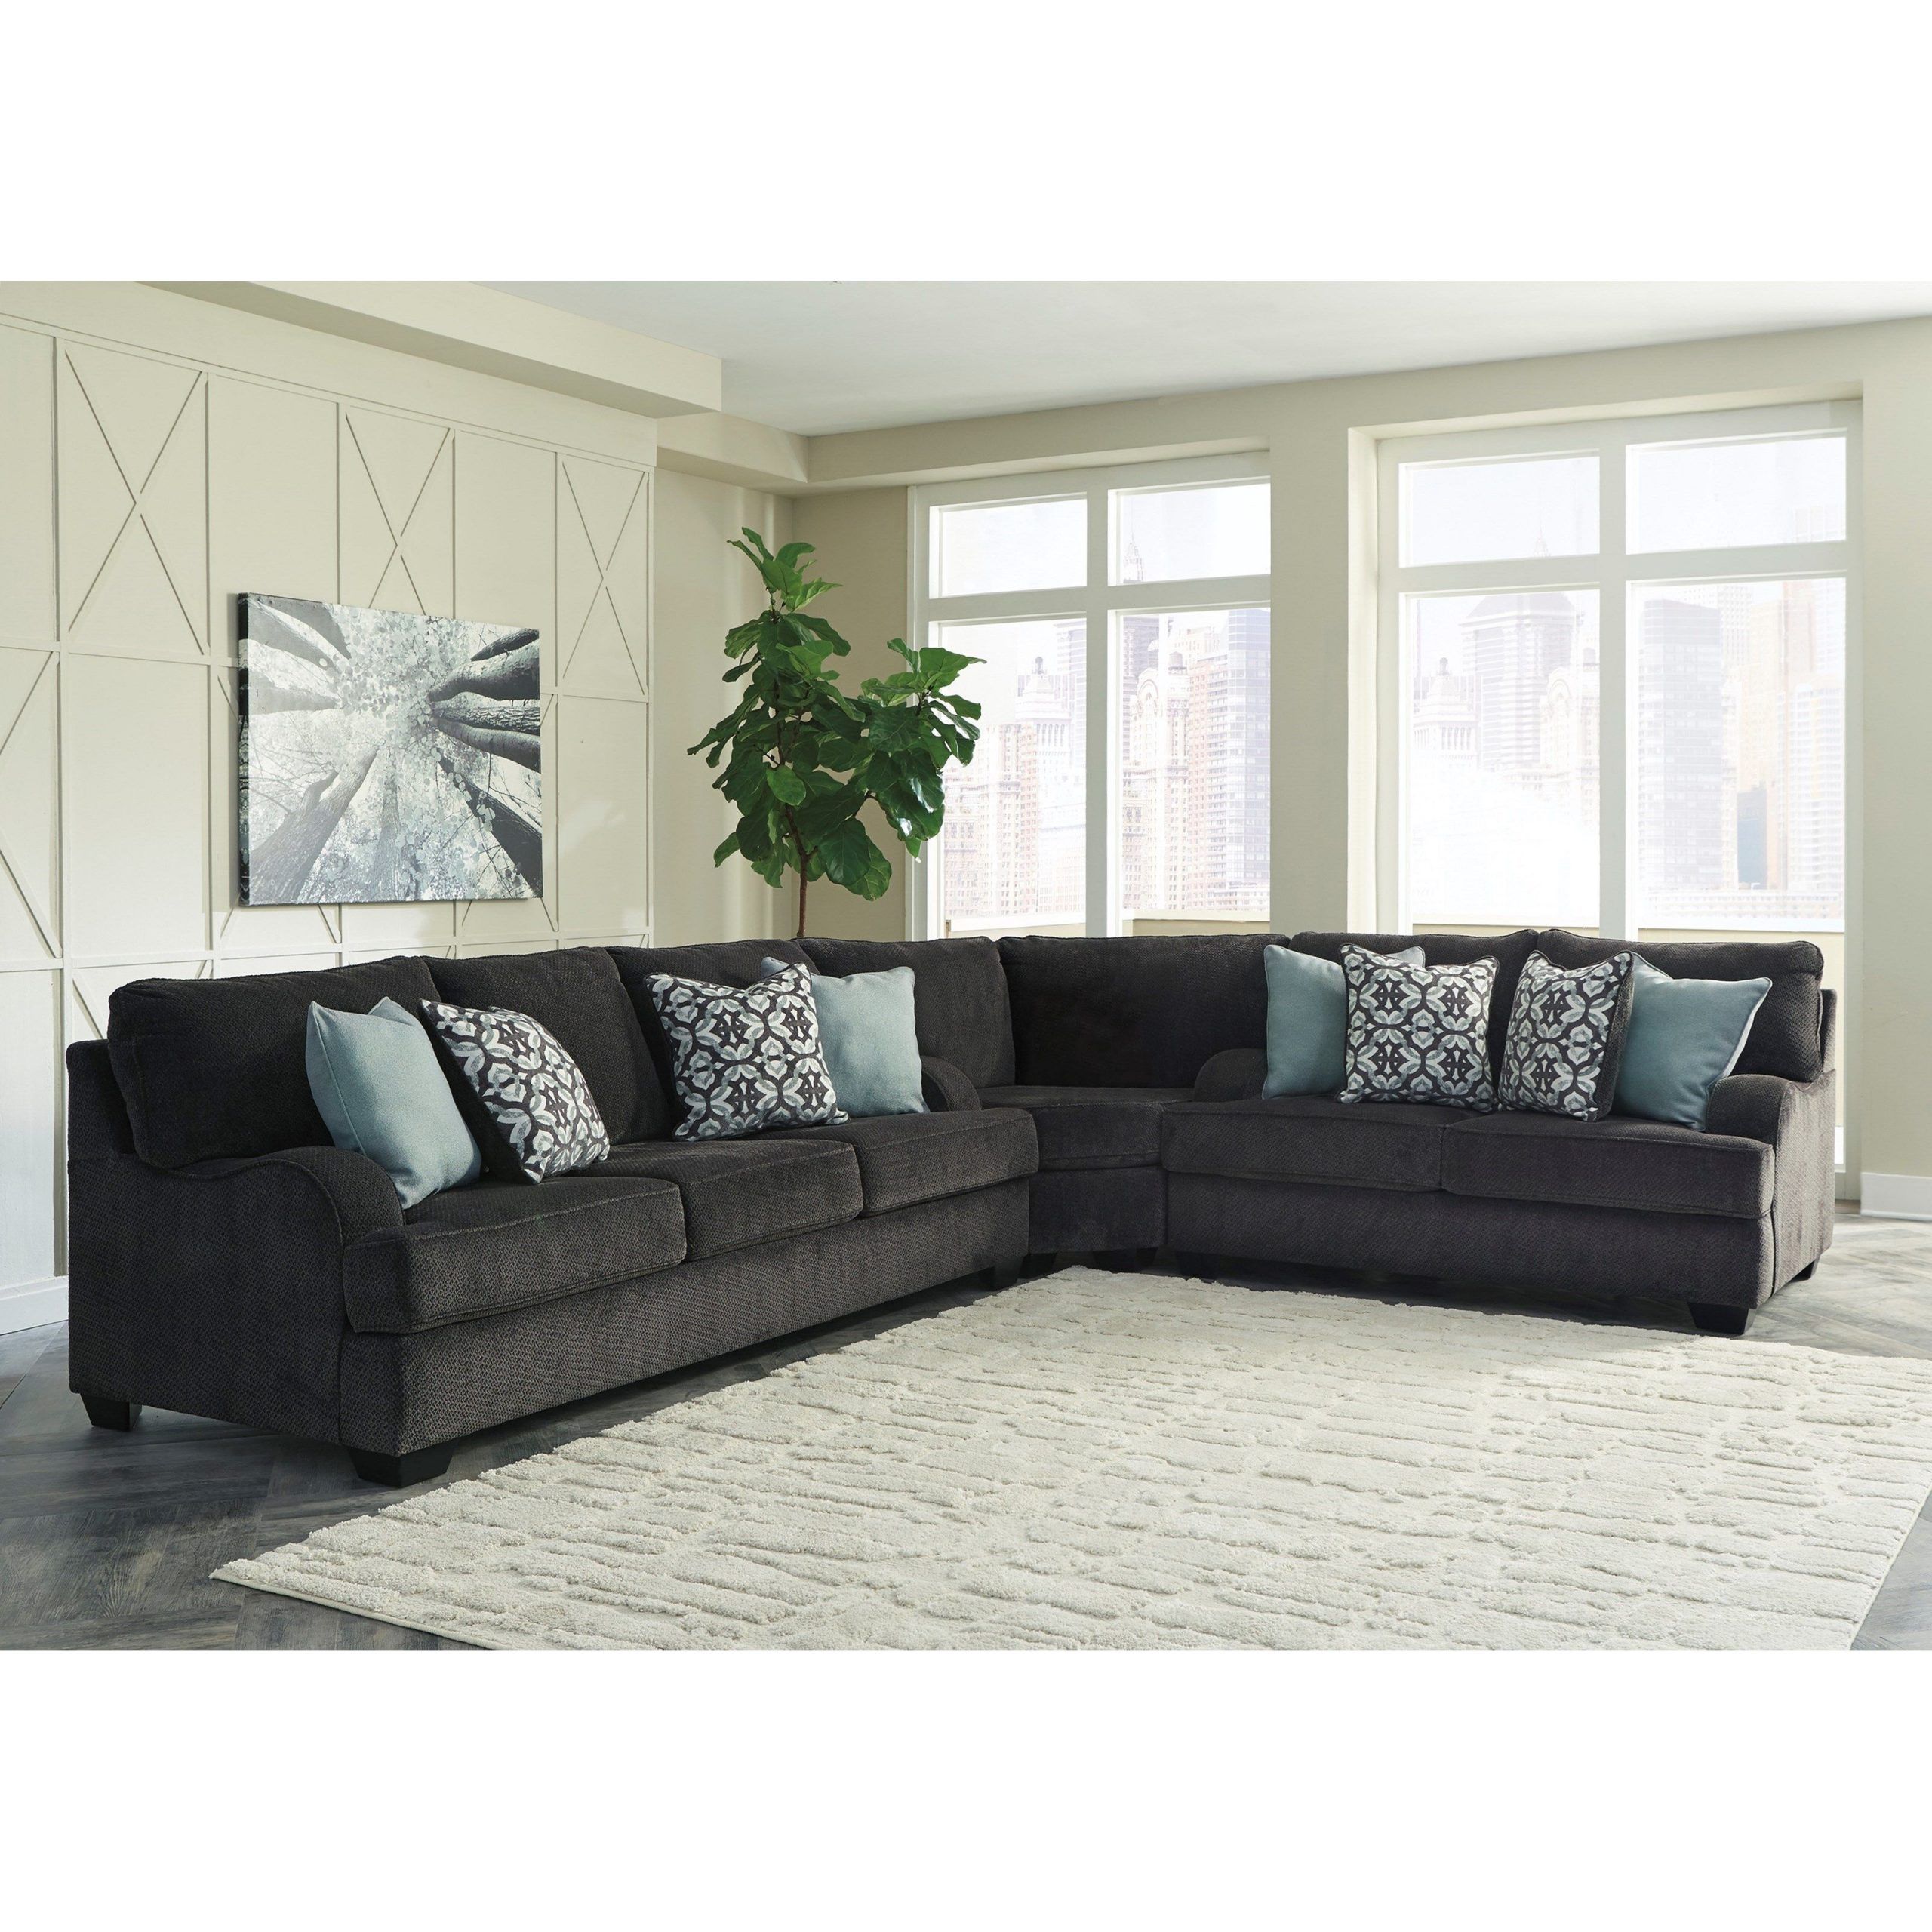 Charenton Sectional Sofa With English Armsbenchcraft Throughout Katie Charcoal Sofas (View 13 of 15)